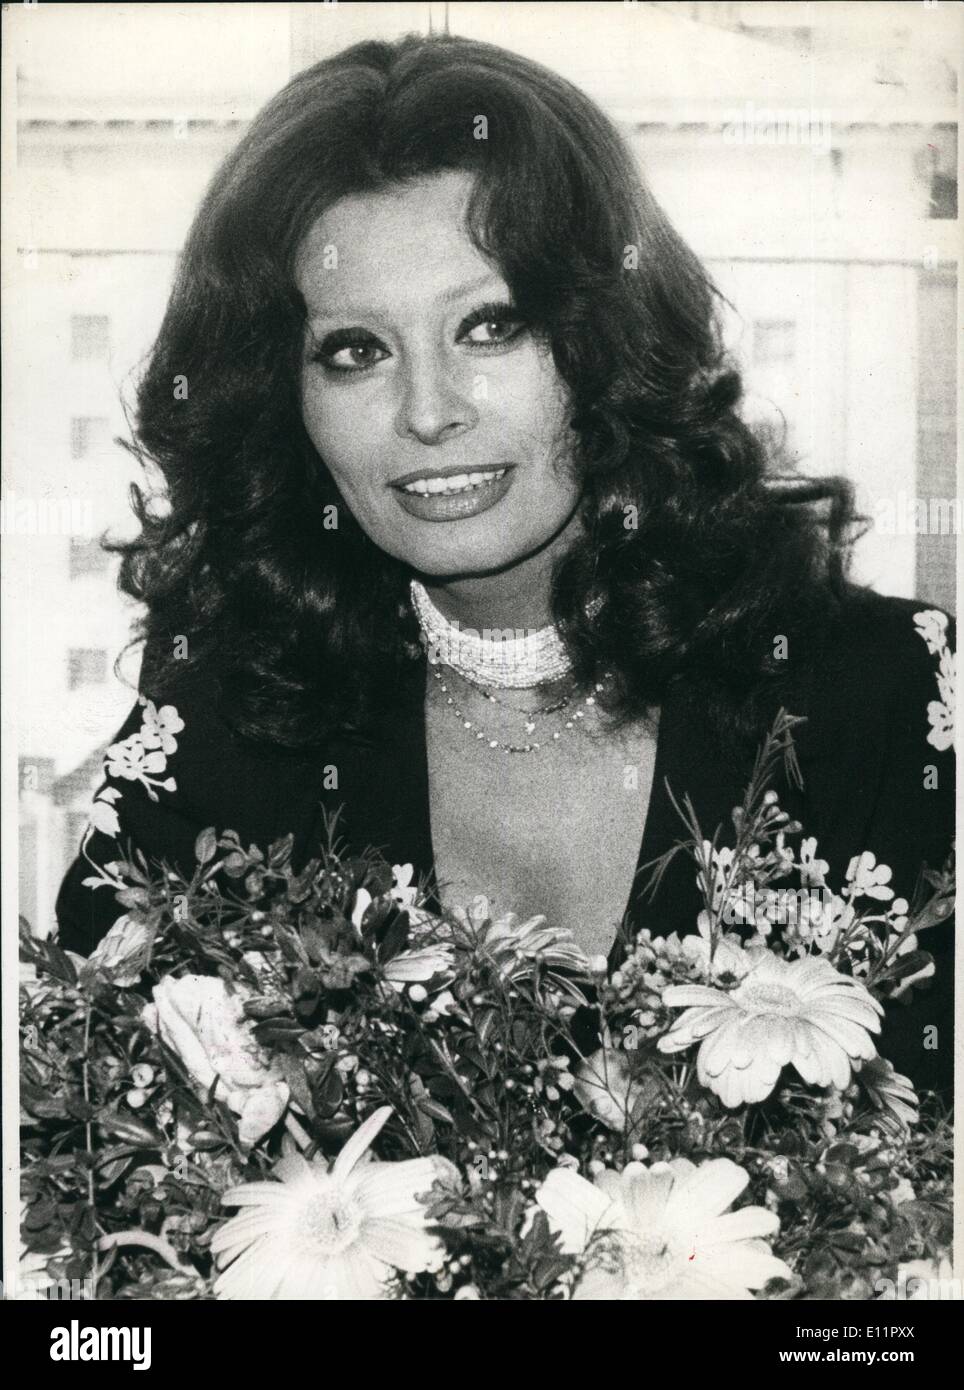 Sep. 09, 1979 - Sophia Loren becomes 45 years old. The superstar of the international film : Sophia Loren (Sophia Loren - picture) becomes 45 years old, at September 20th, 1979 she celebrates this birthday - and looking like she do, there's no reason to make a secret of it. Since more than 20 years ''The Loren'' is on the top of the film-business - a brilliant success. Born 1934 in Rome/Italy as a nice but poor child, grown up in Napoli, Sophia Scicolone who intends to become a teacher, was insisted to the show-business by her mother Stock Photo